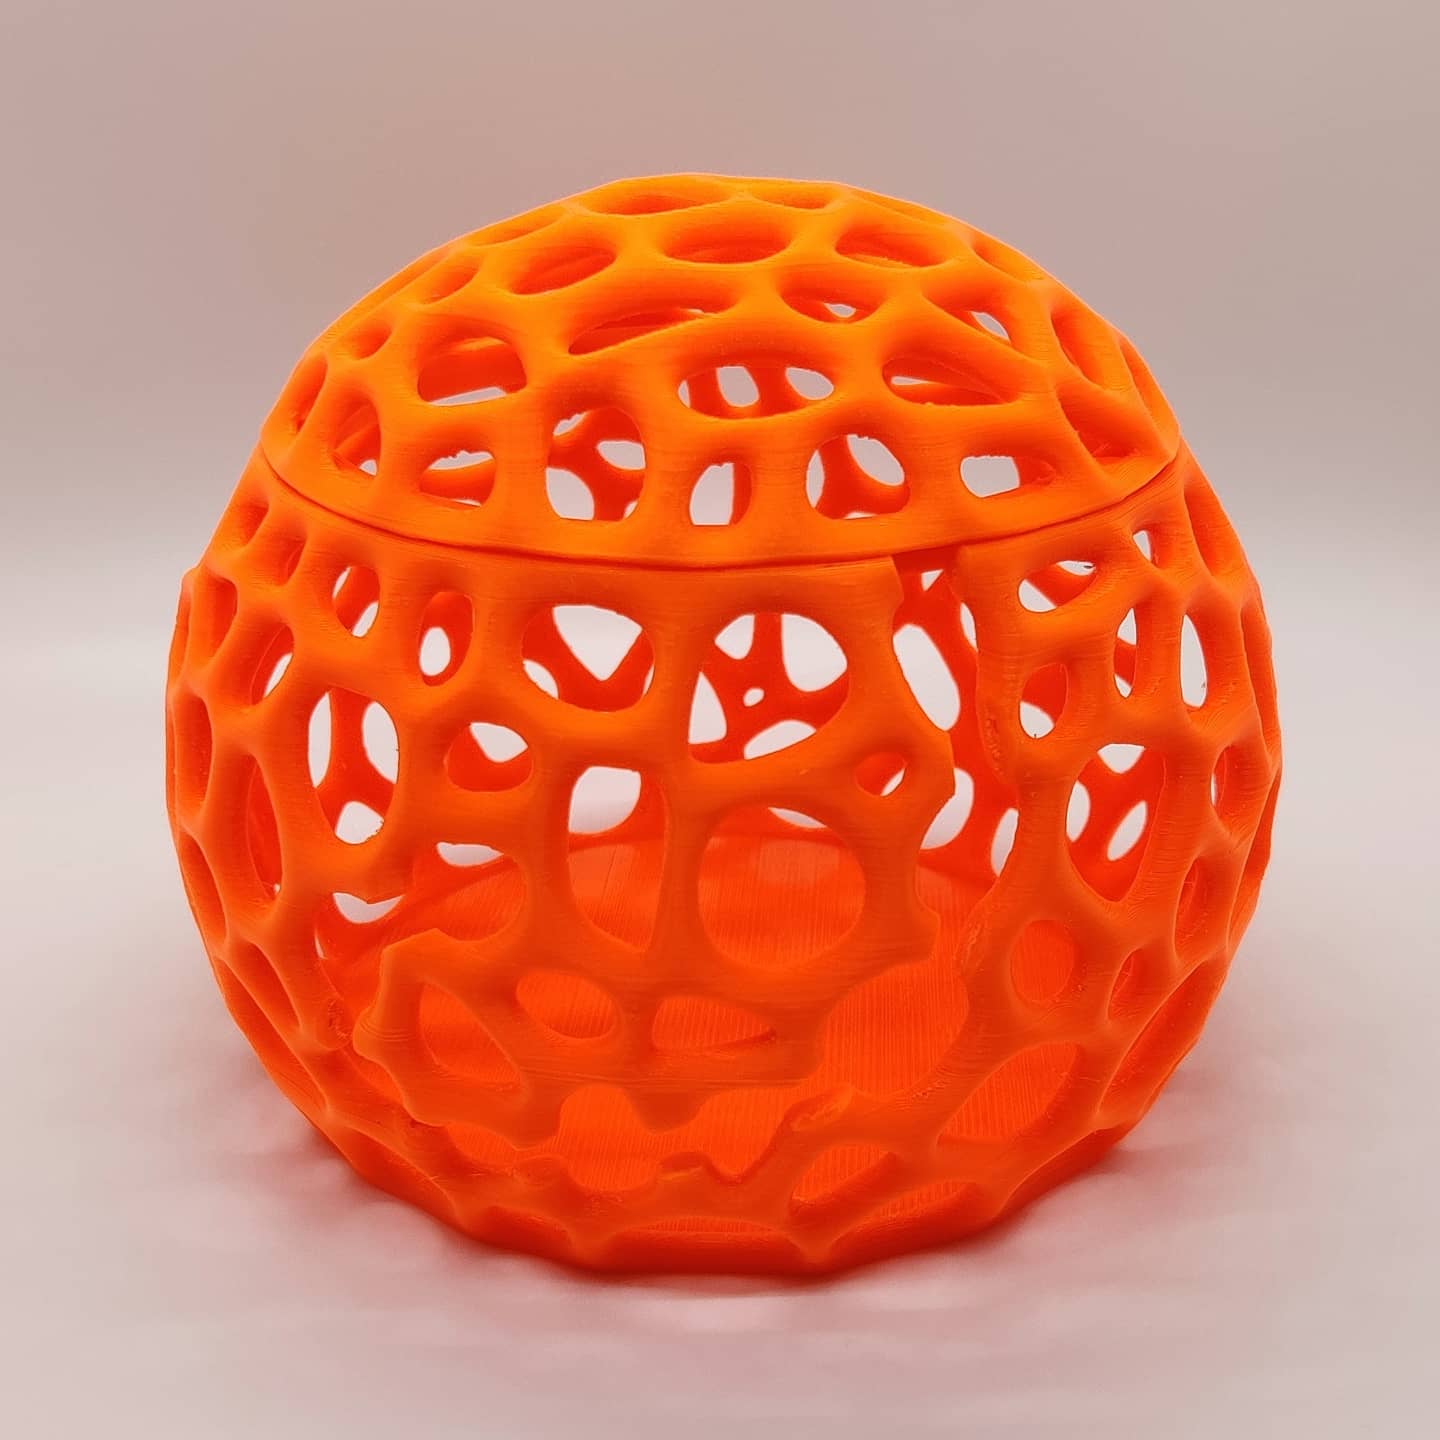 Philaminar 3D on "Look what's shipping out today! I especially like how the black Voronoi Bowl turned out. https://t.co/xsb4XVA85q #knitting #crochet #yarn #yarnaddict #yarnbowl #craft #crafting #3Dprinting #3dprint #3dprinted #